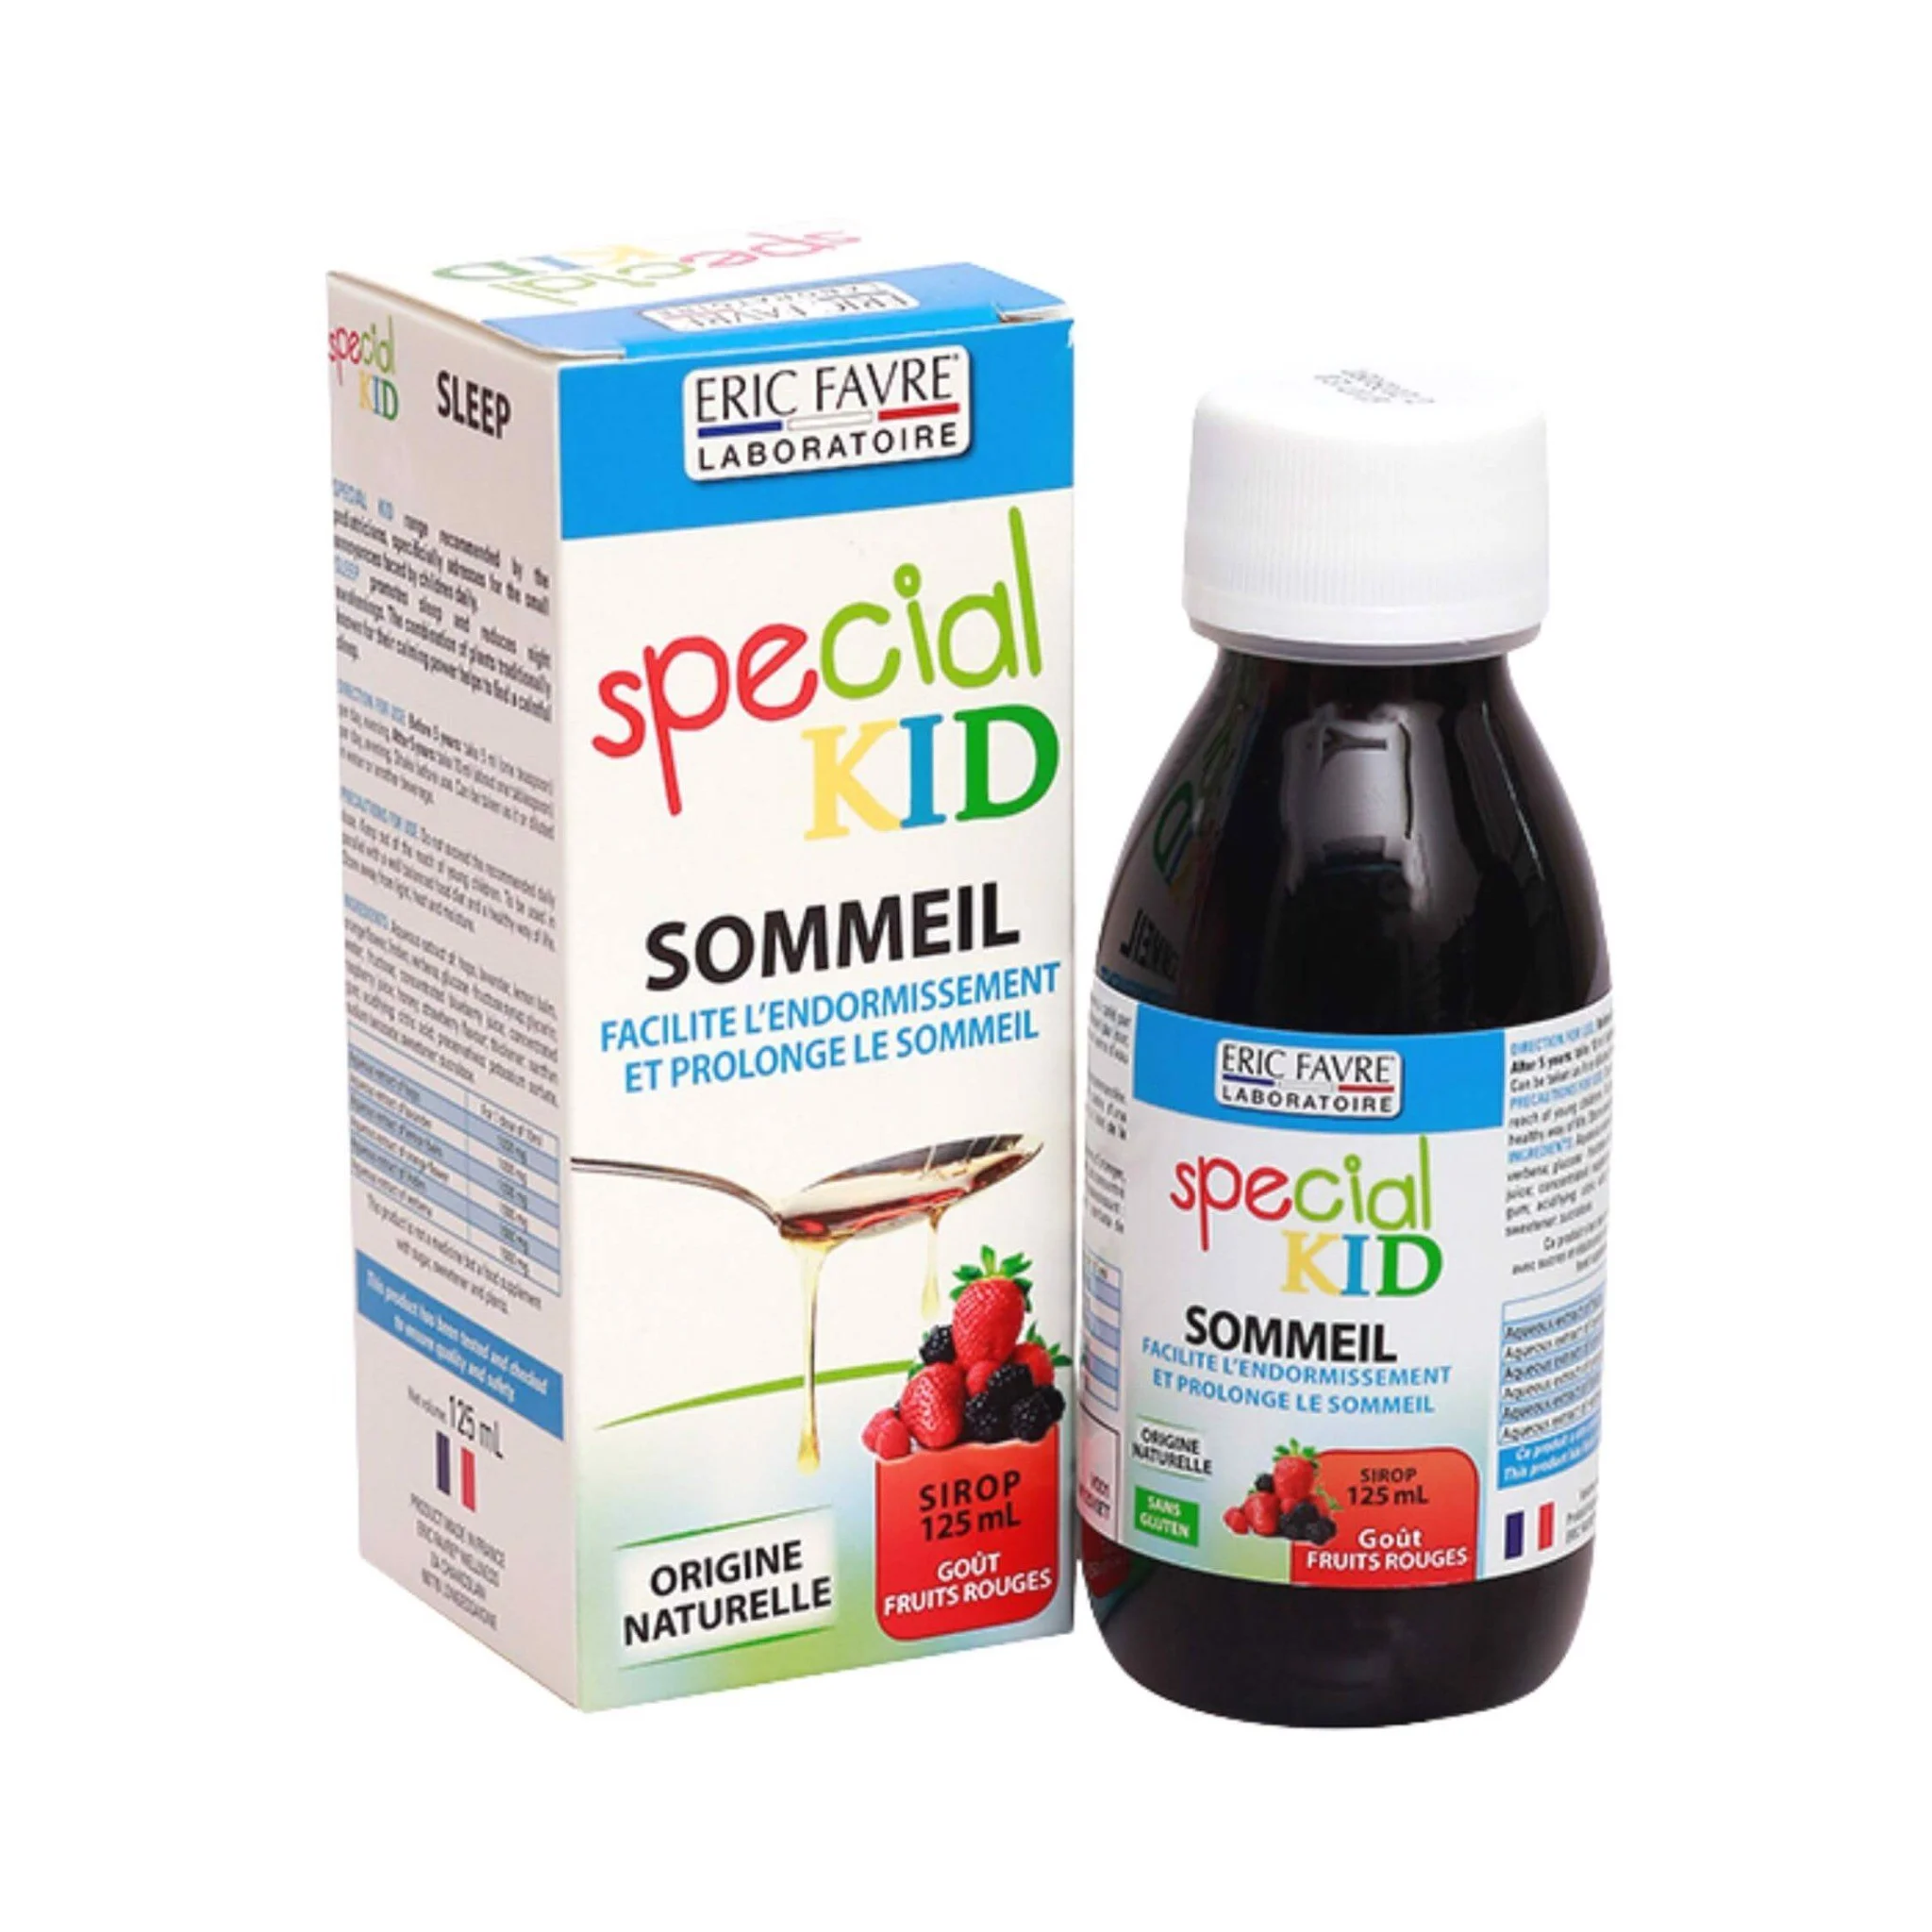 SPECIAL KID SOMMEIL made in France